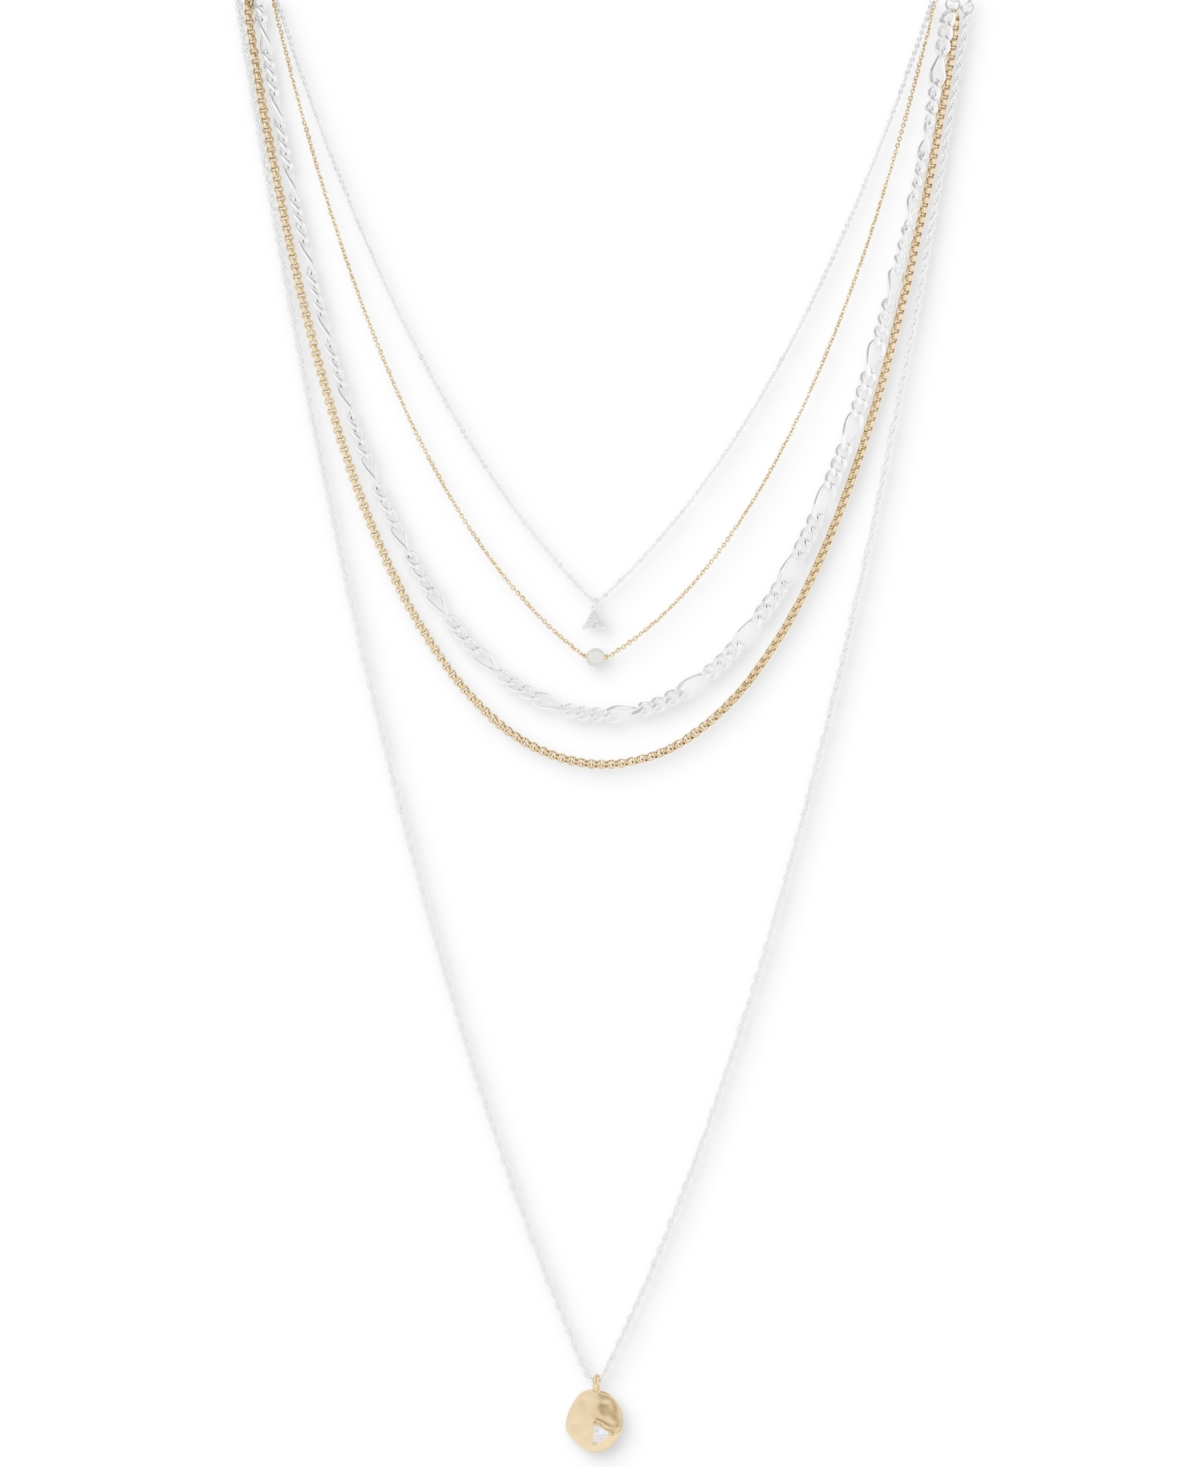 Lucky Brand Two-tone Crystal Pendant Layered Convertible Necklace, 16" + 2" Extender In Yellow